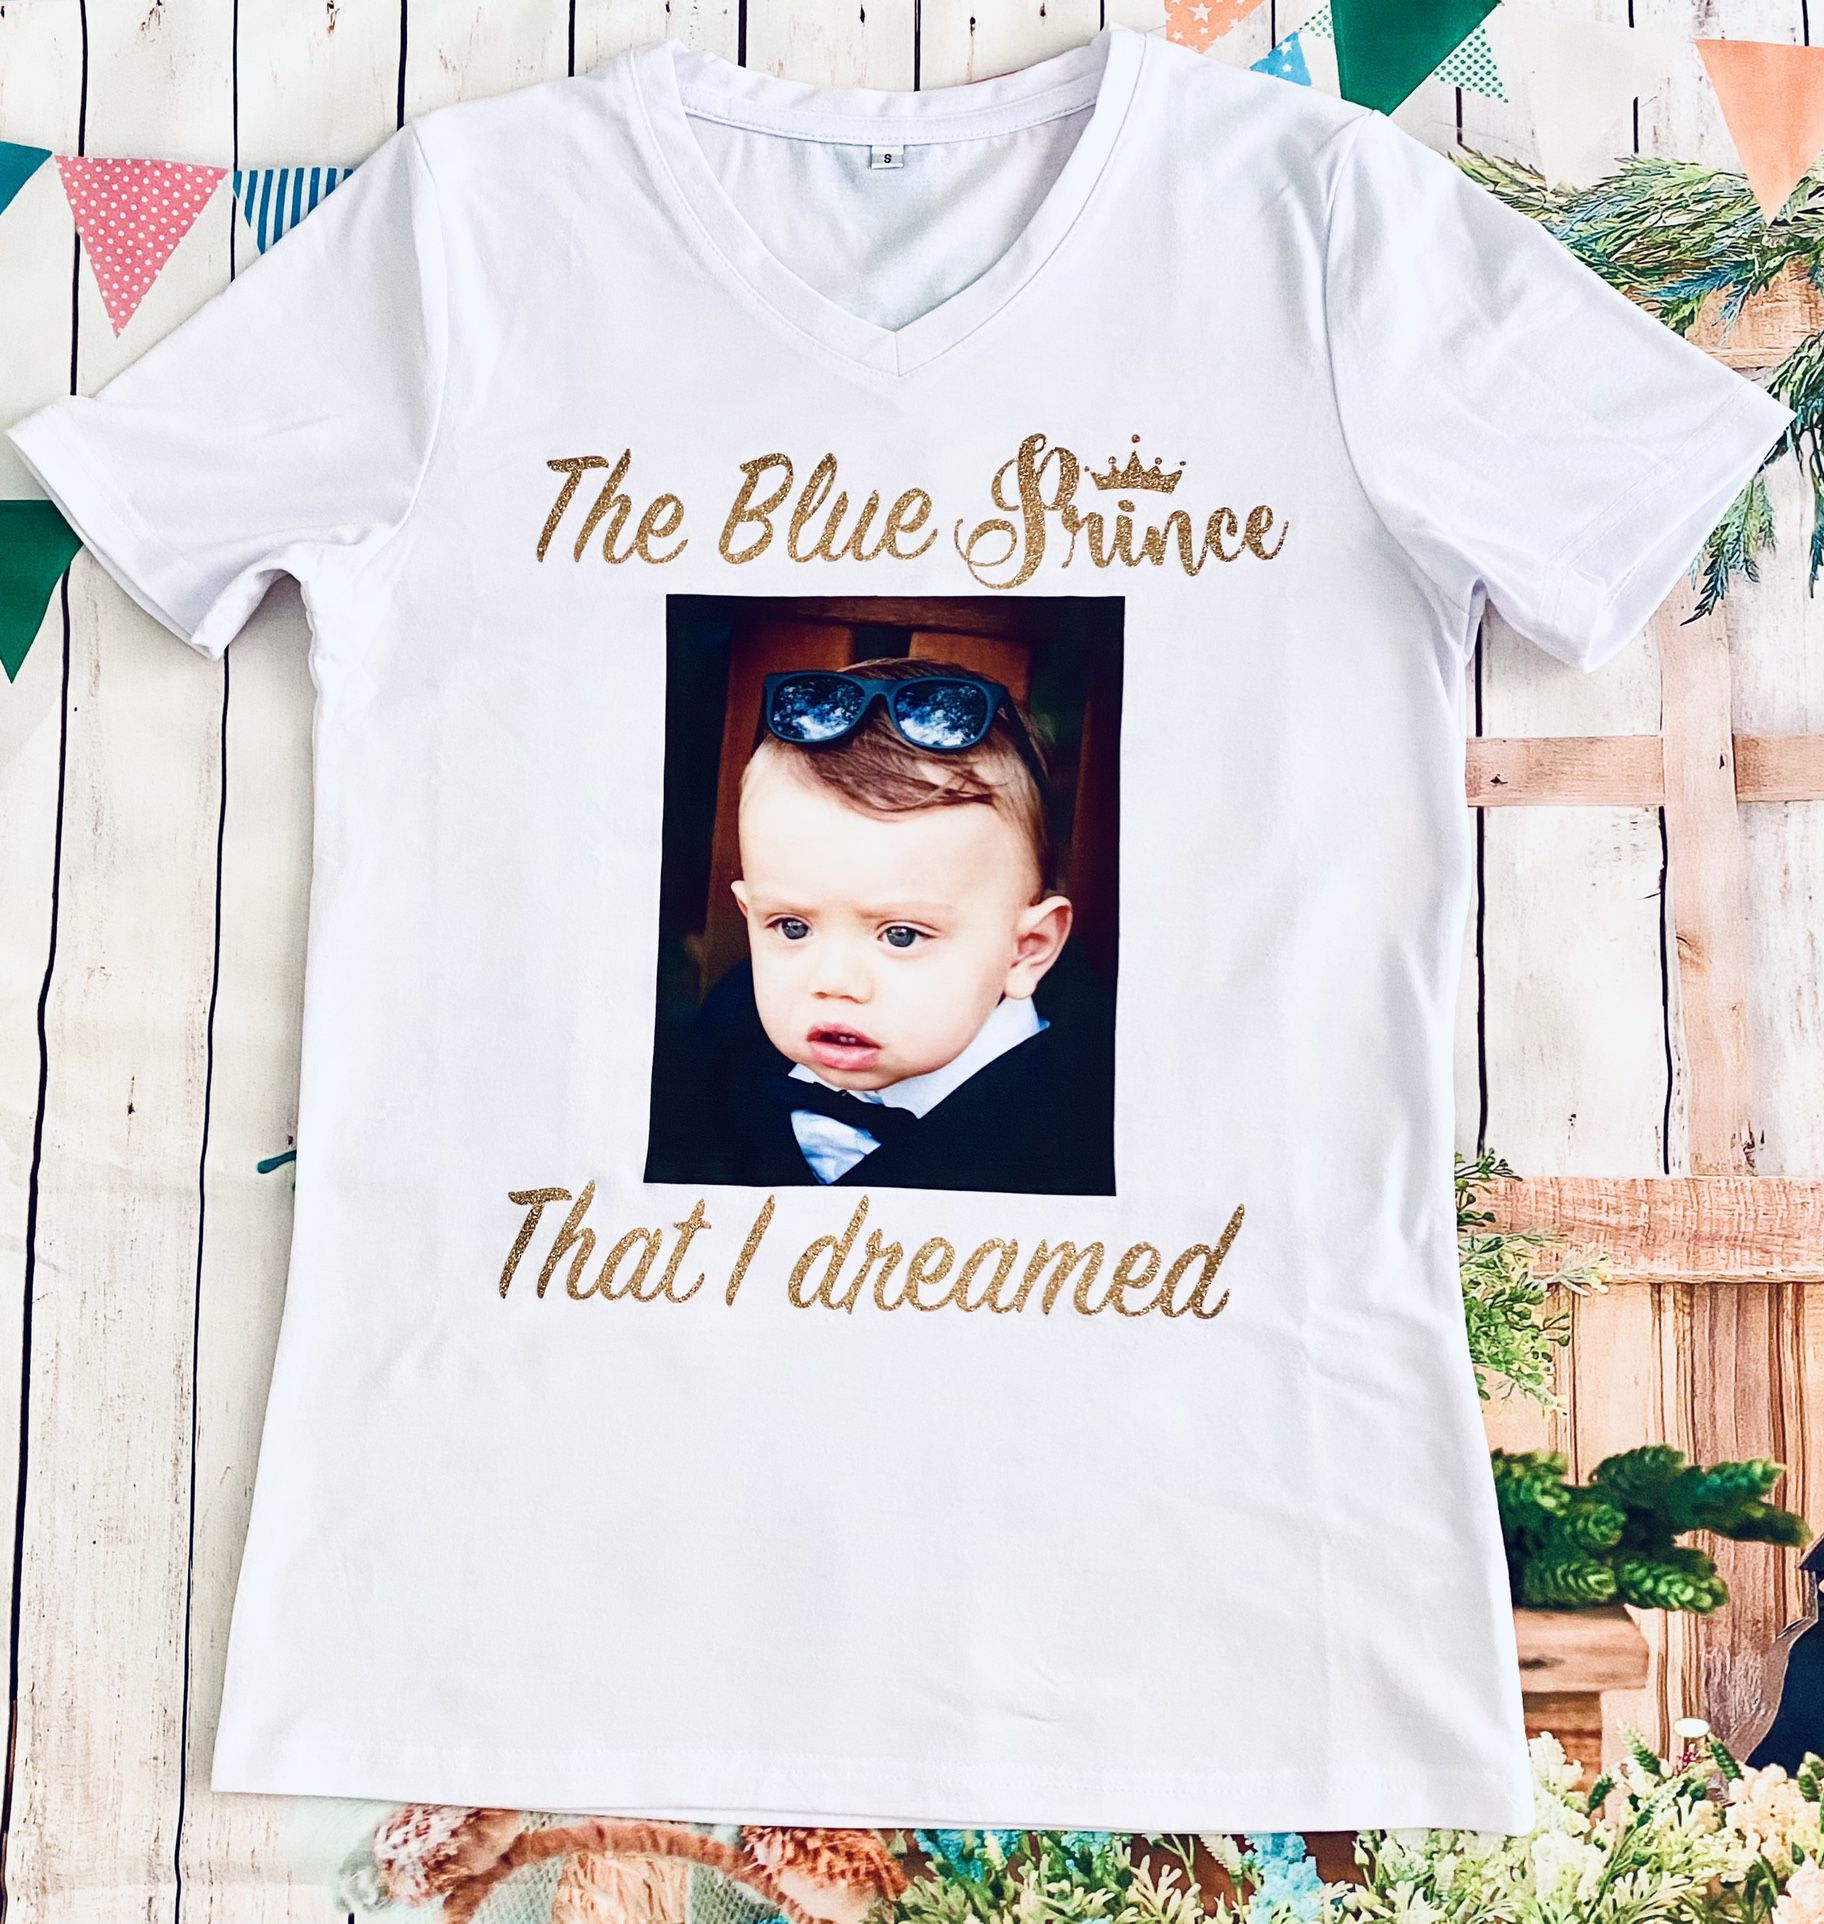 Personalized t-shirt with photo and text.